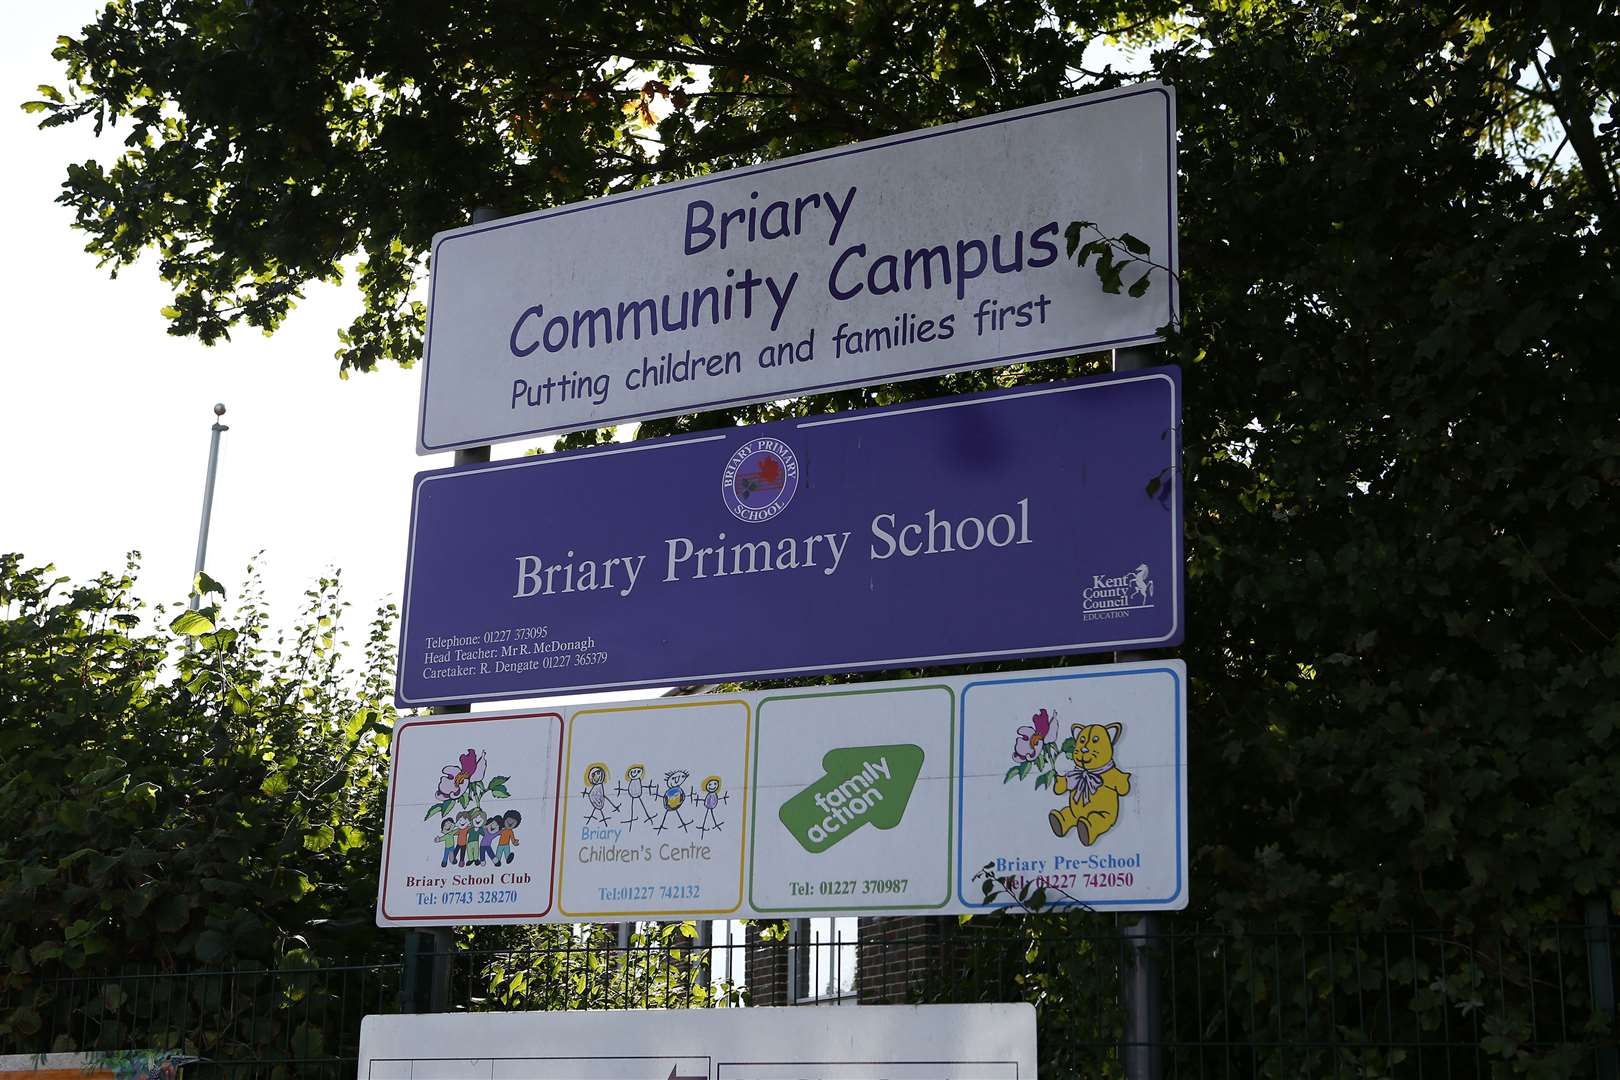 Pupils from Briary Primary School have been without milk since the theft yesterday